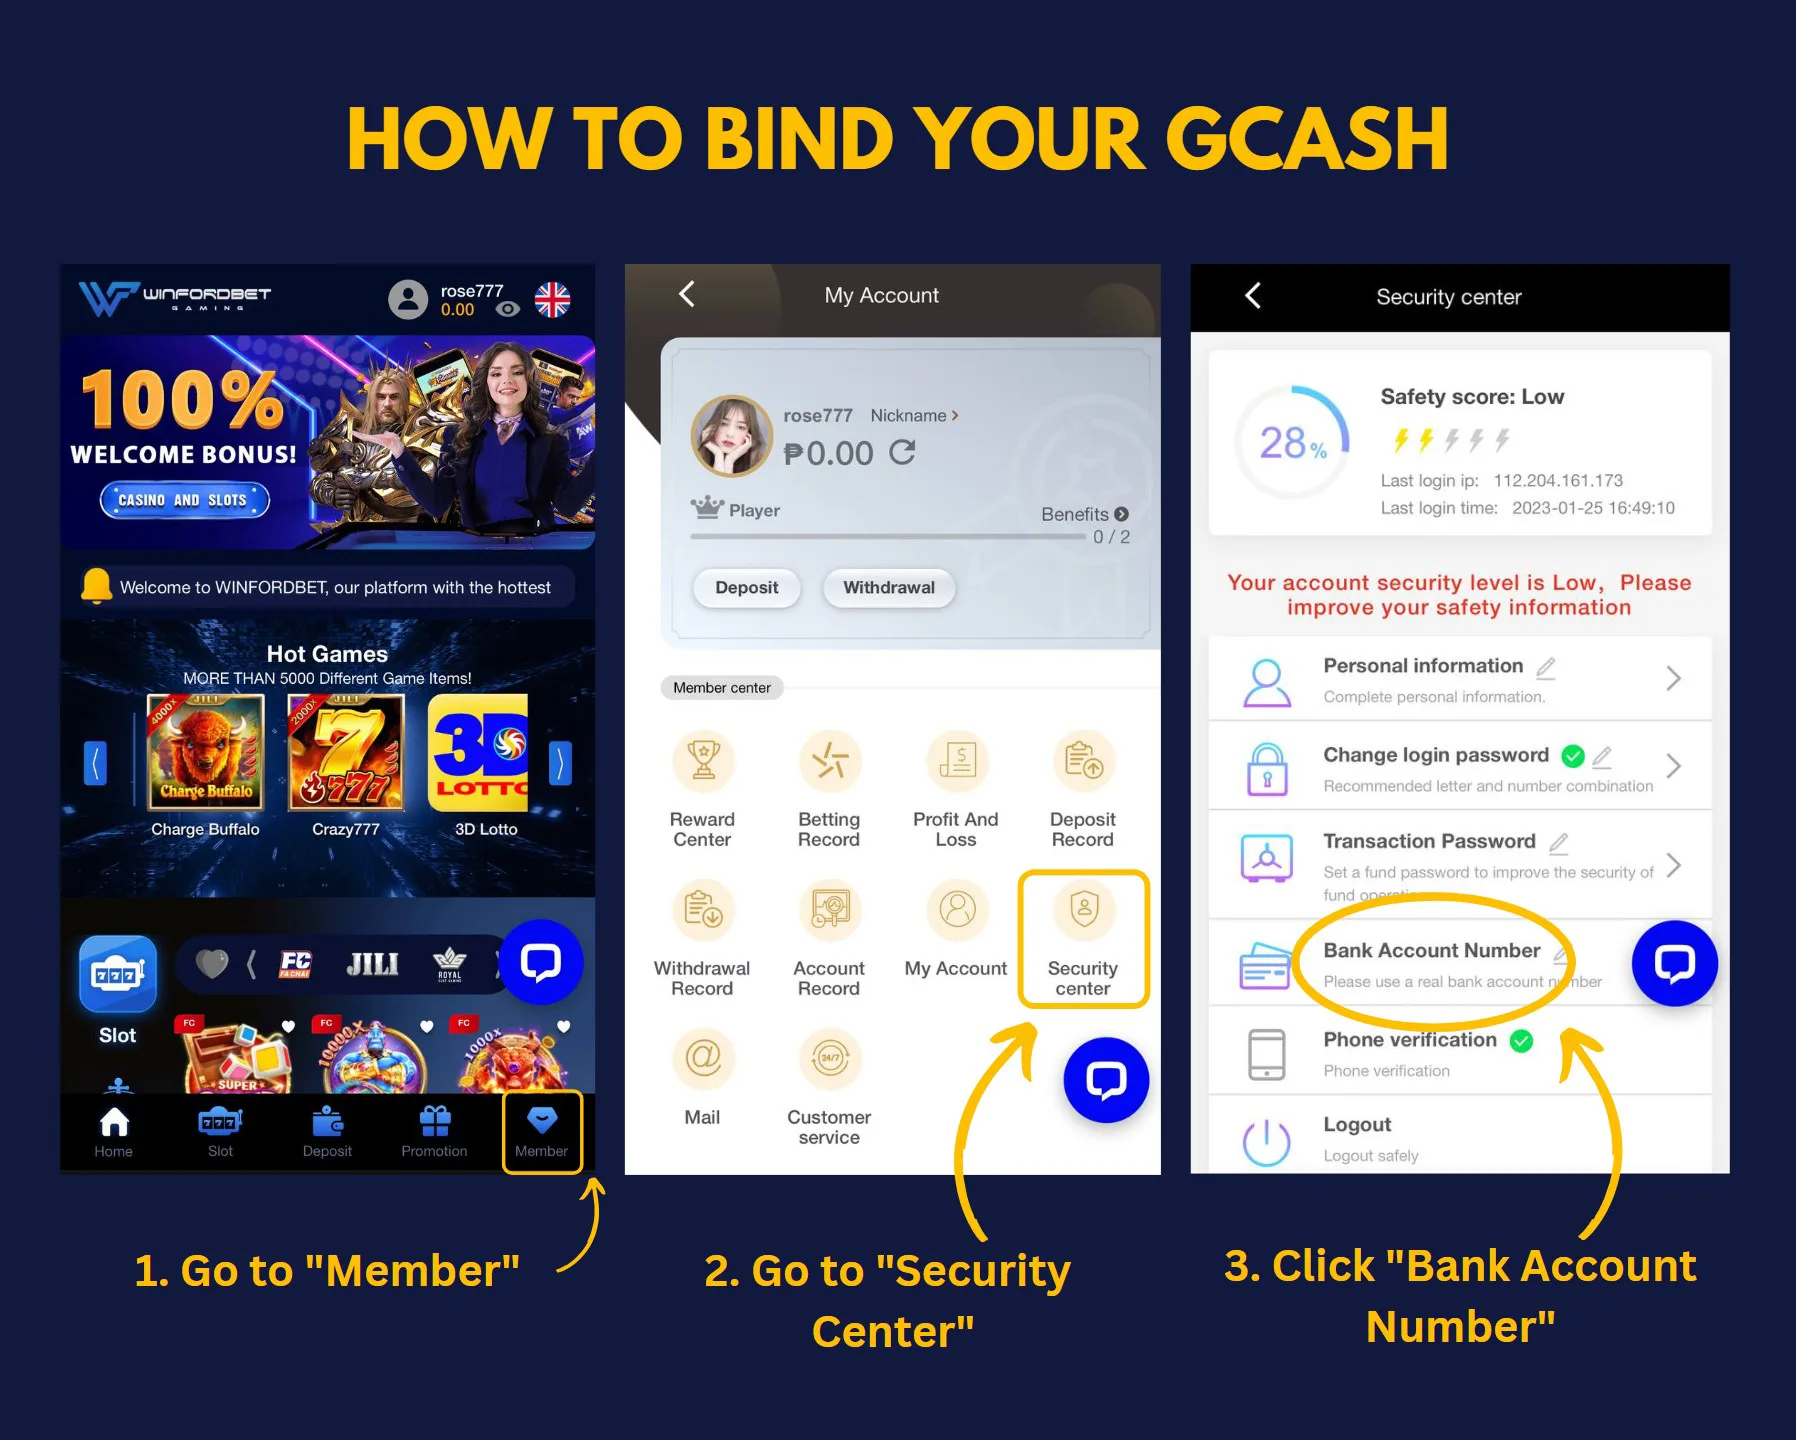 HOW TO BIND YOUR GCASH (1)